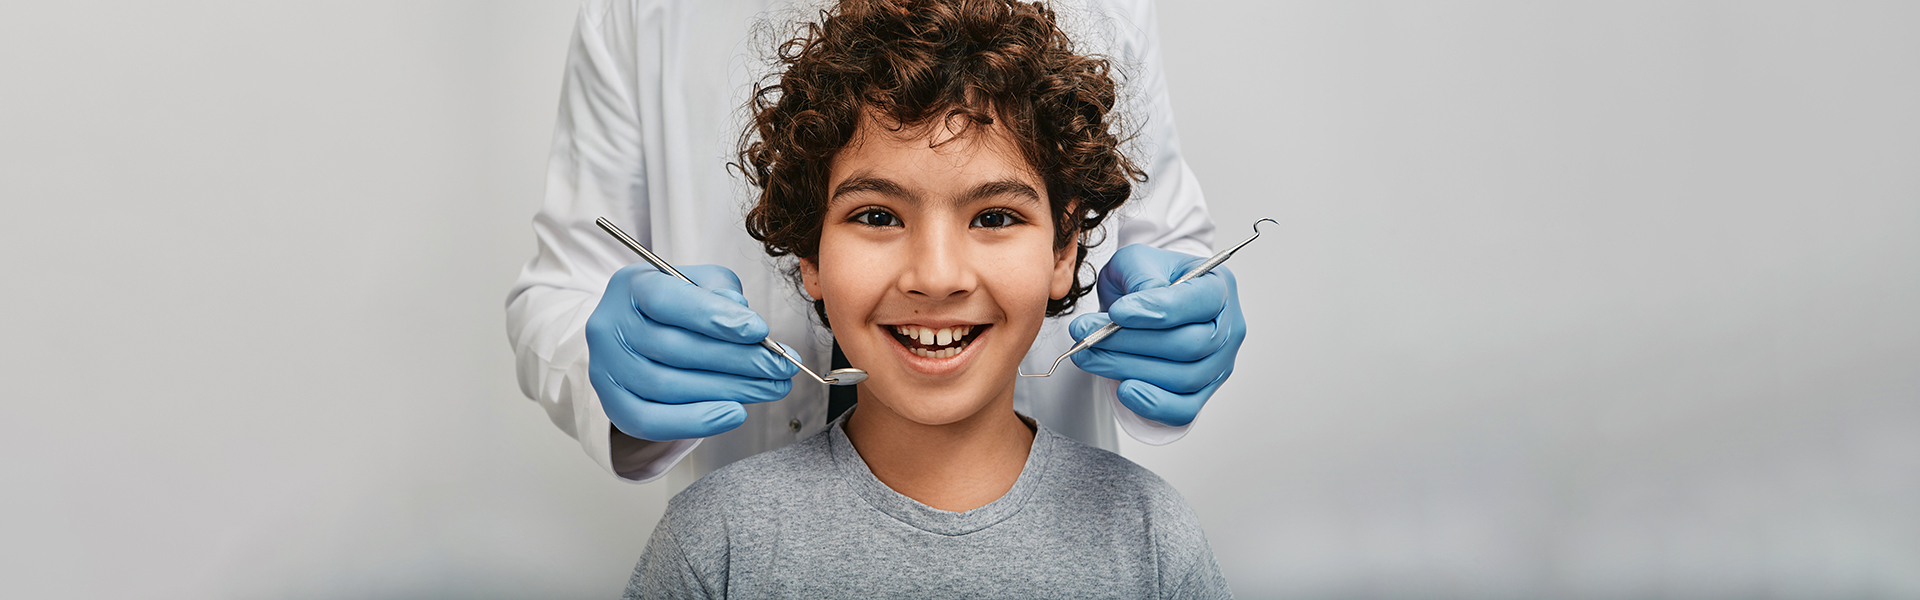 Oshawa Dentist: How to Ease Your Child’s Dental Fear